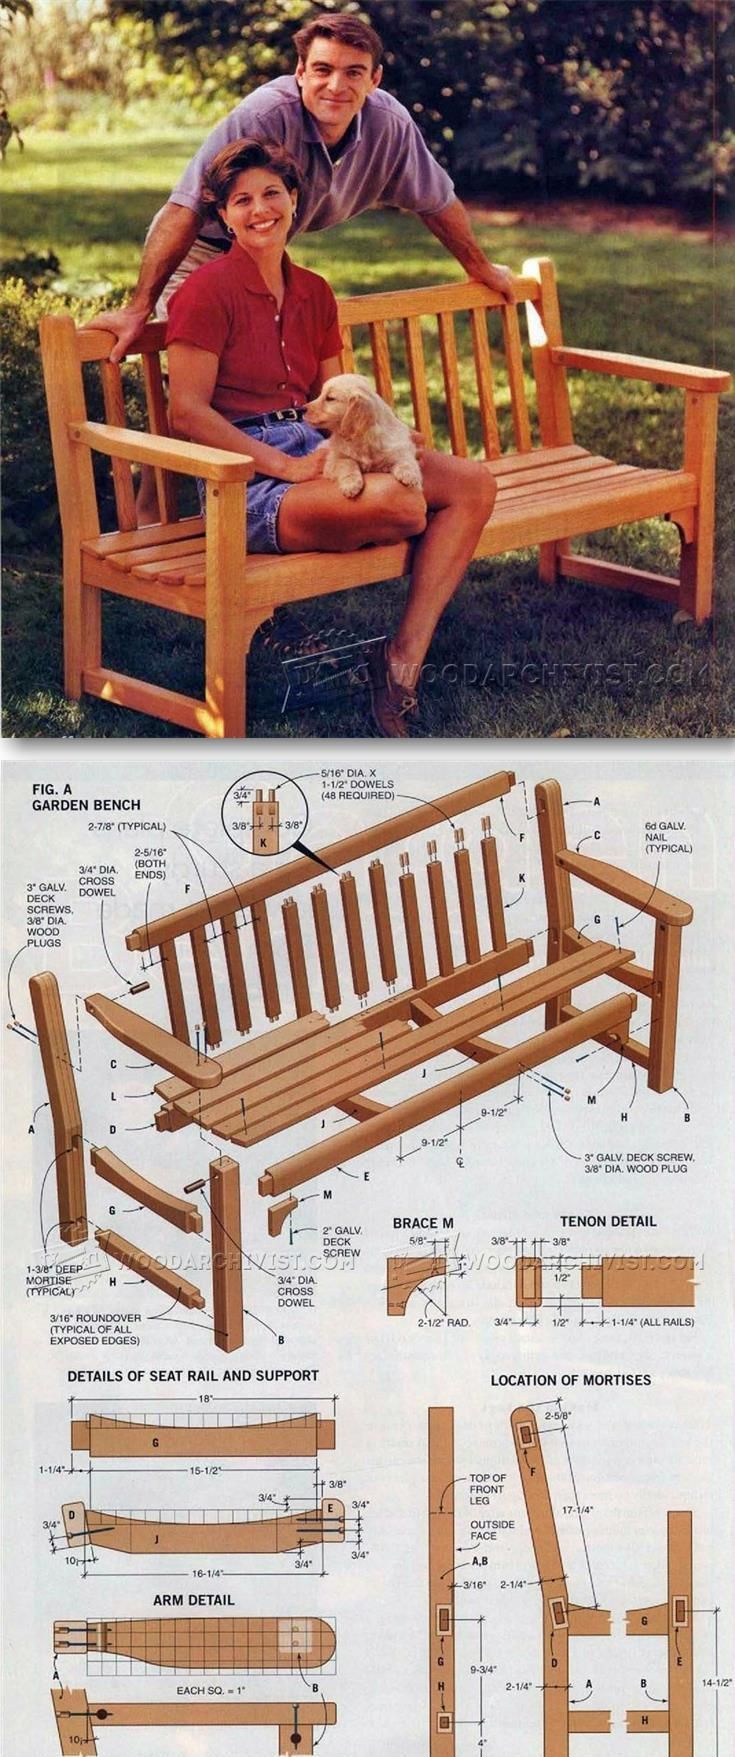 Garden Bench Plans – Outdoor Furniture Plans and Projects | WoodArchivist.com